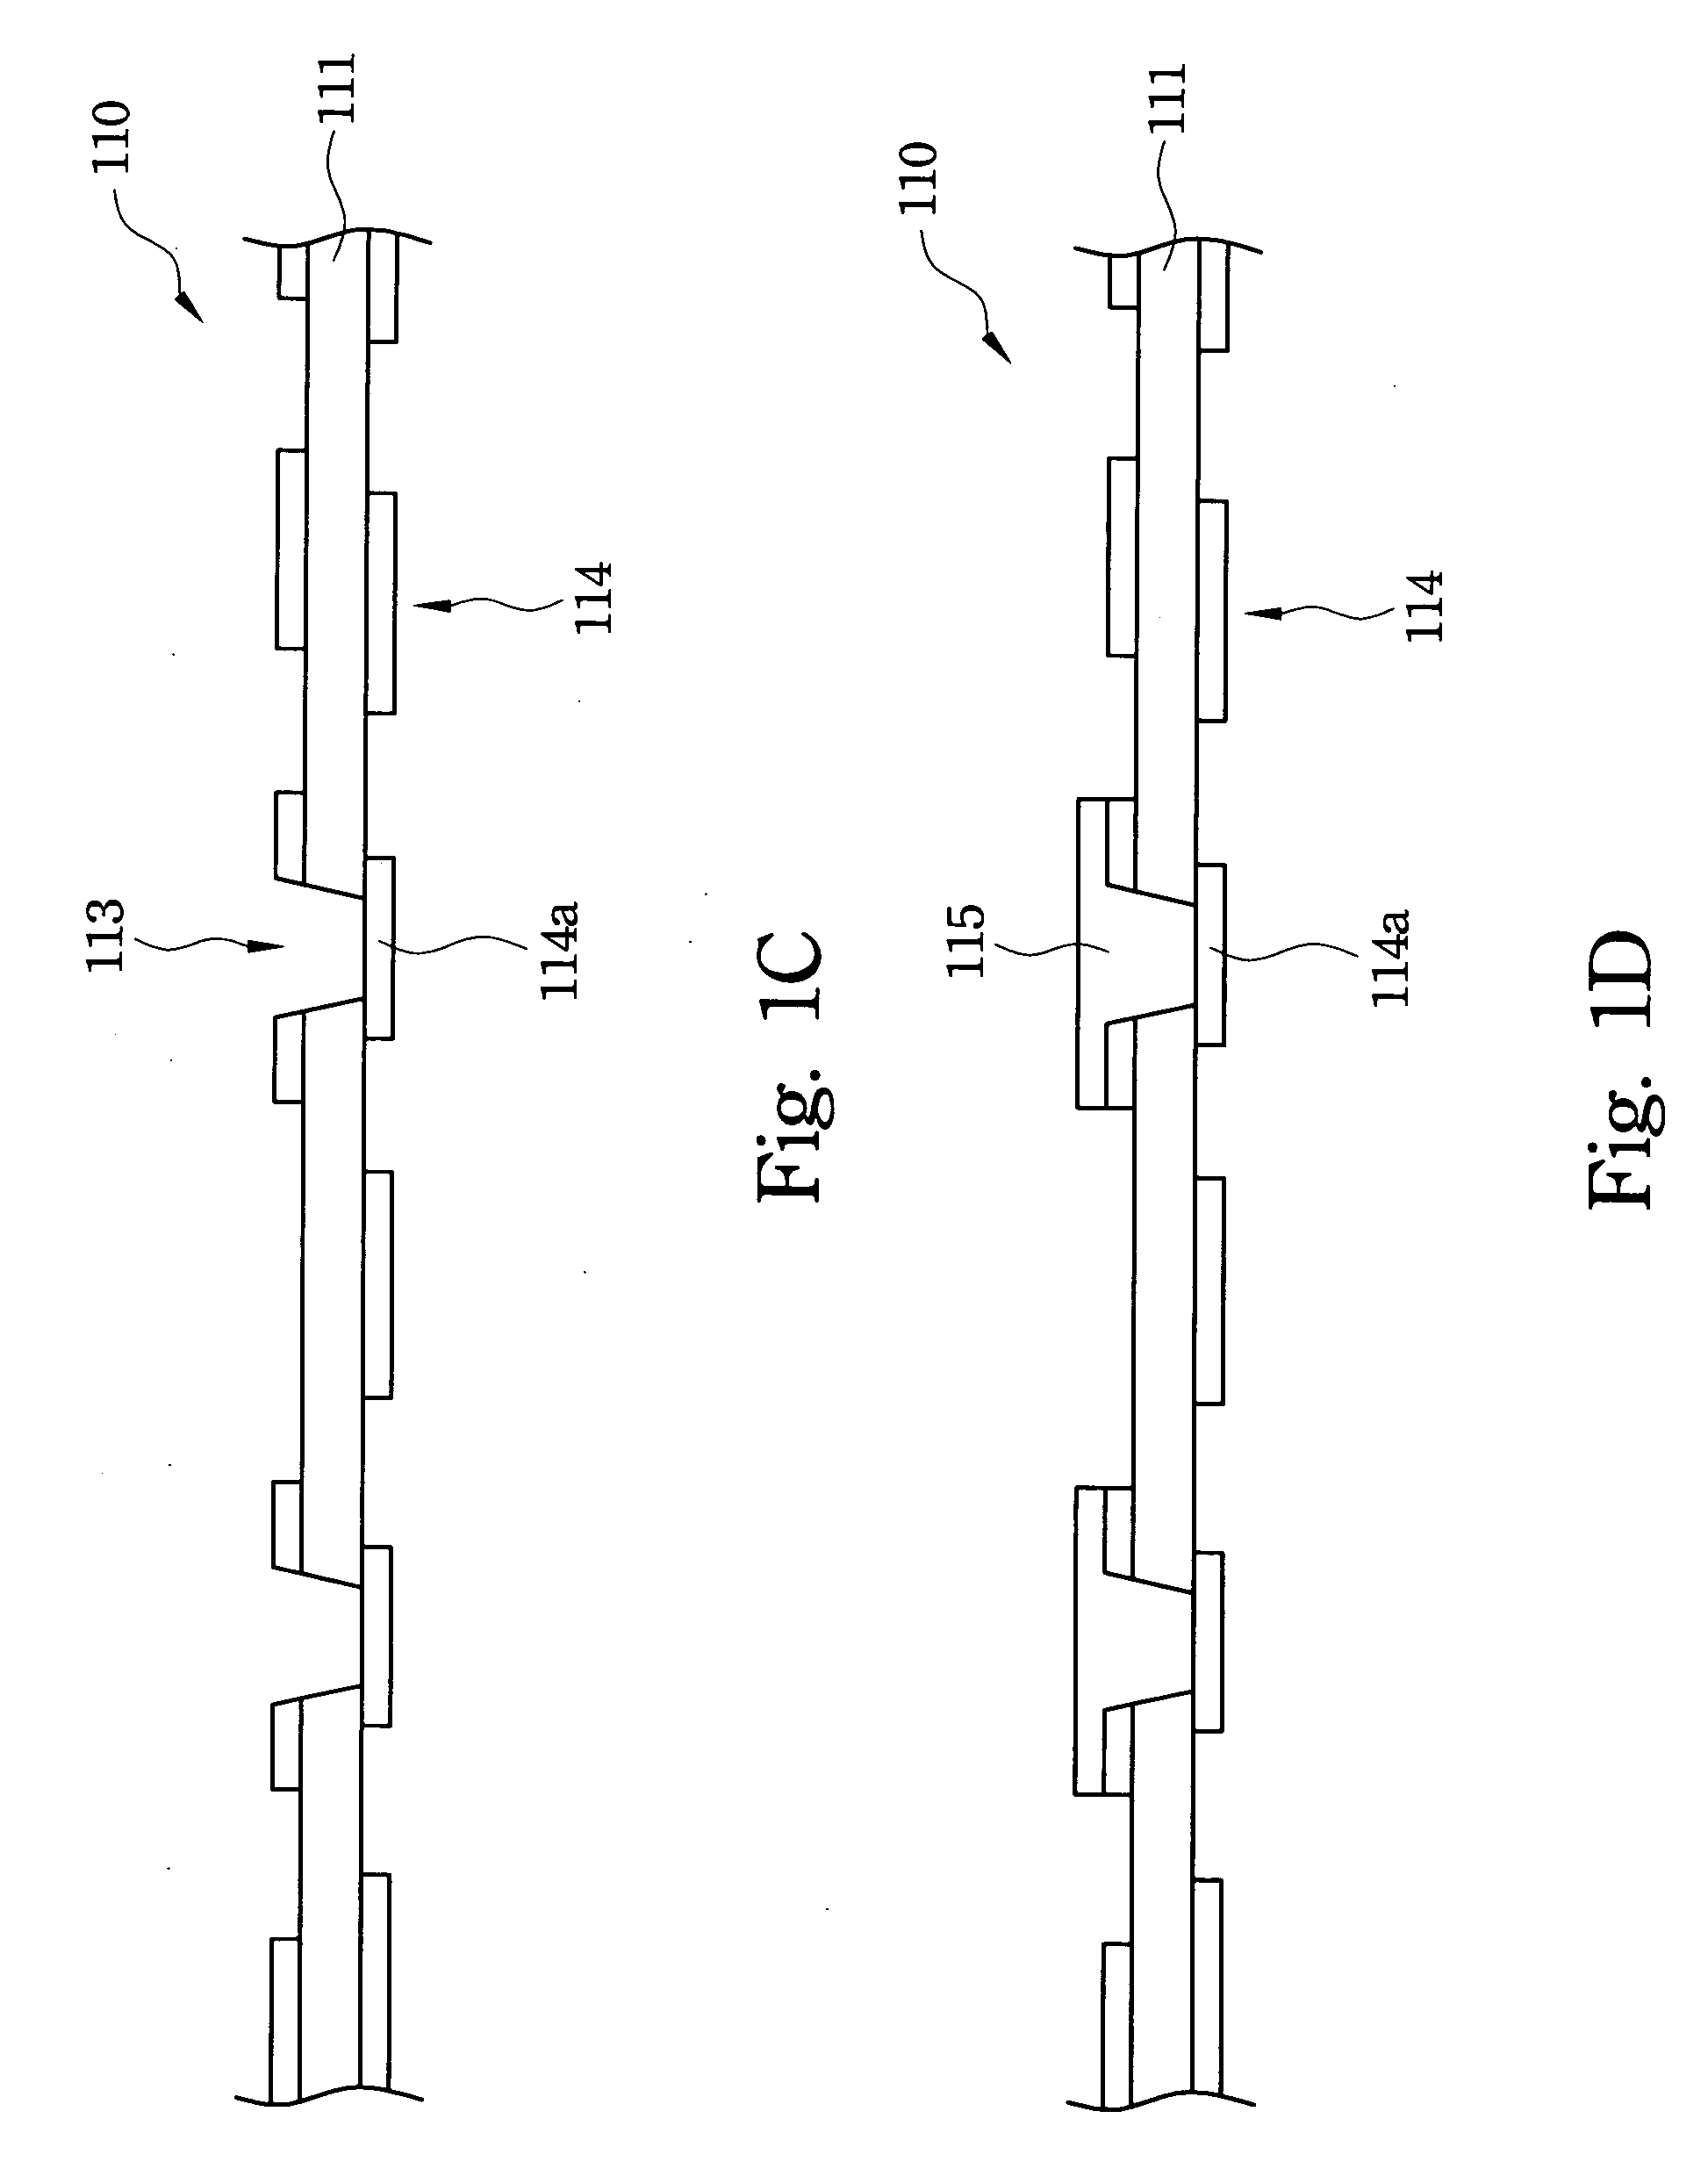 Manufacturing method for integrating passive component within substrate